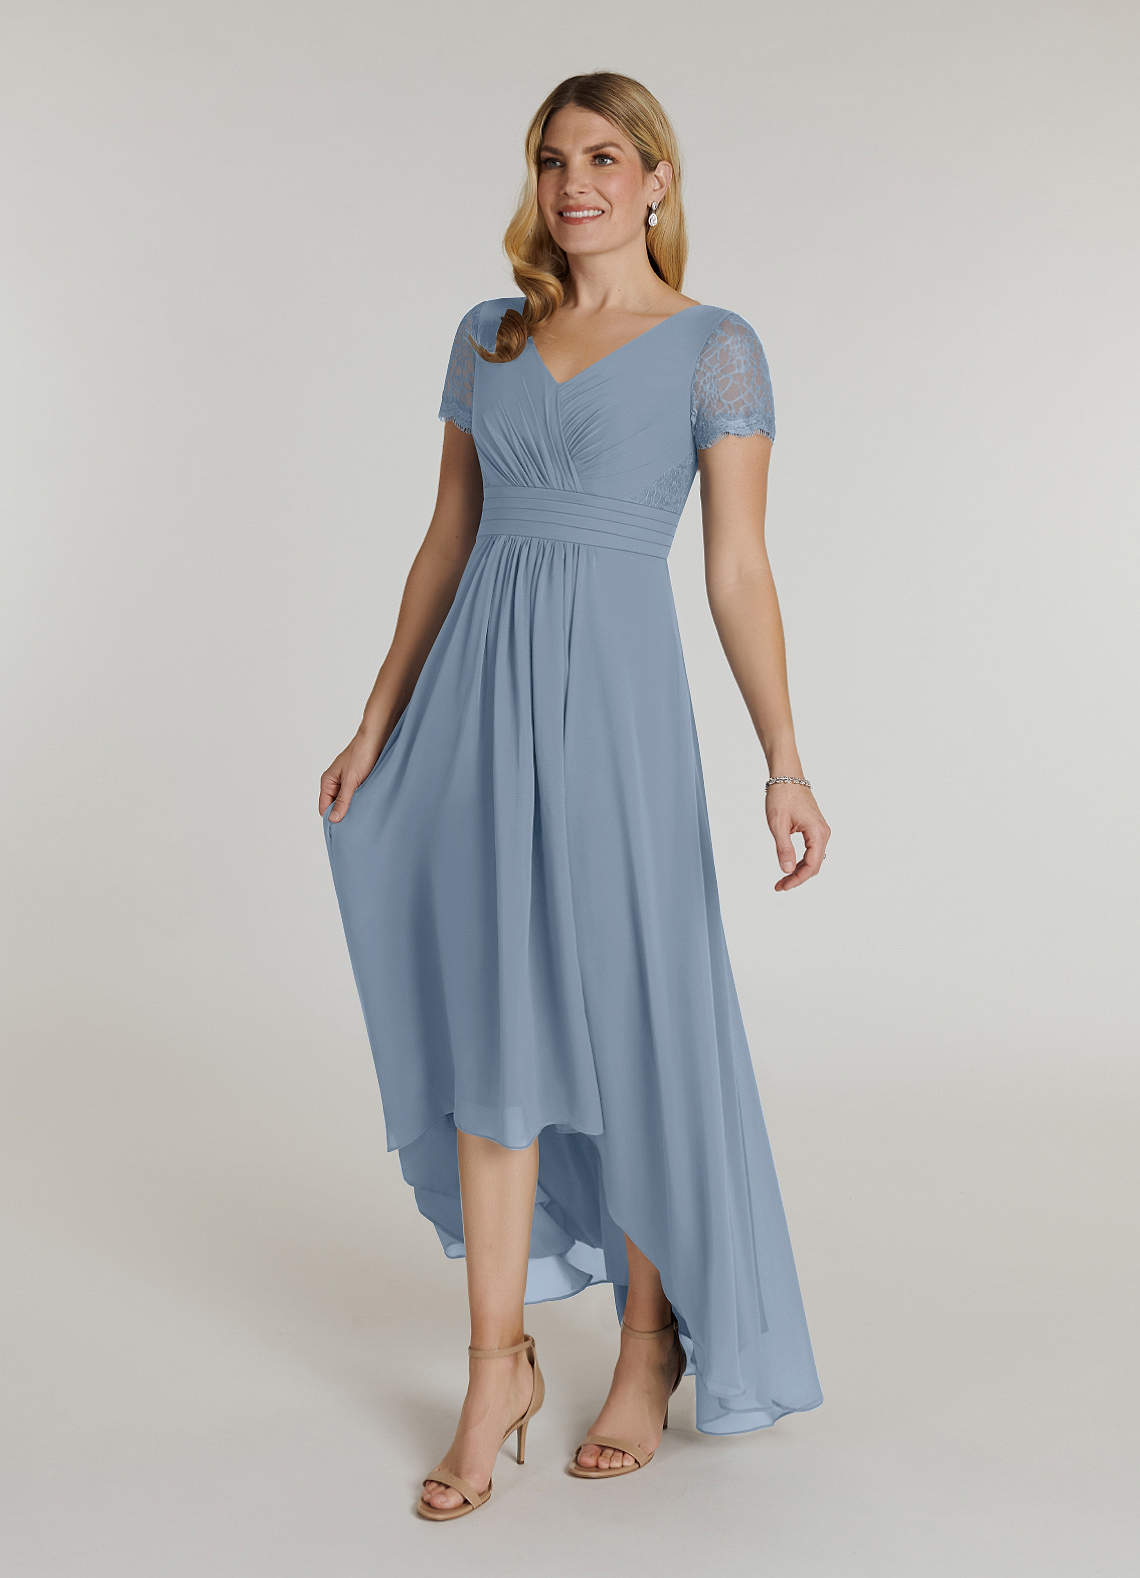 Azazie Polly Mother of the Bride Dresses A-Line Lace Chiffon Asymmetrical Dress image1